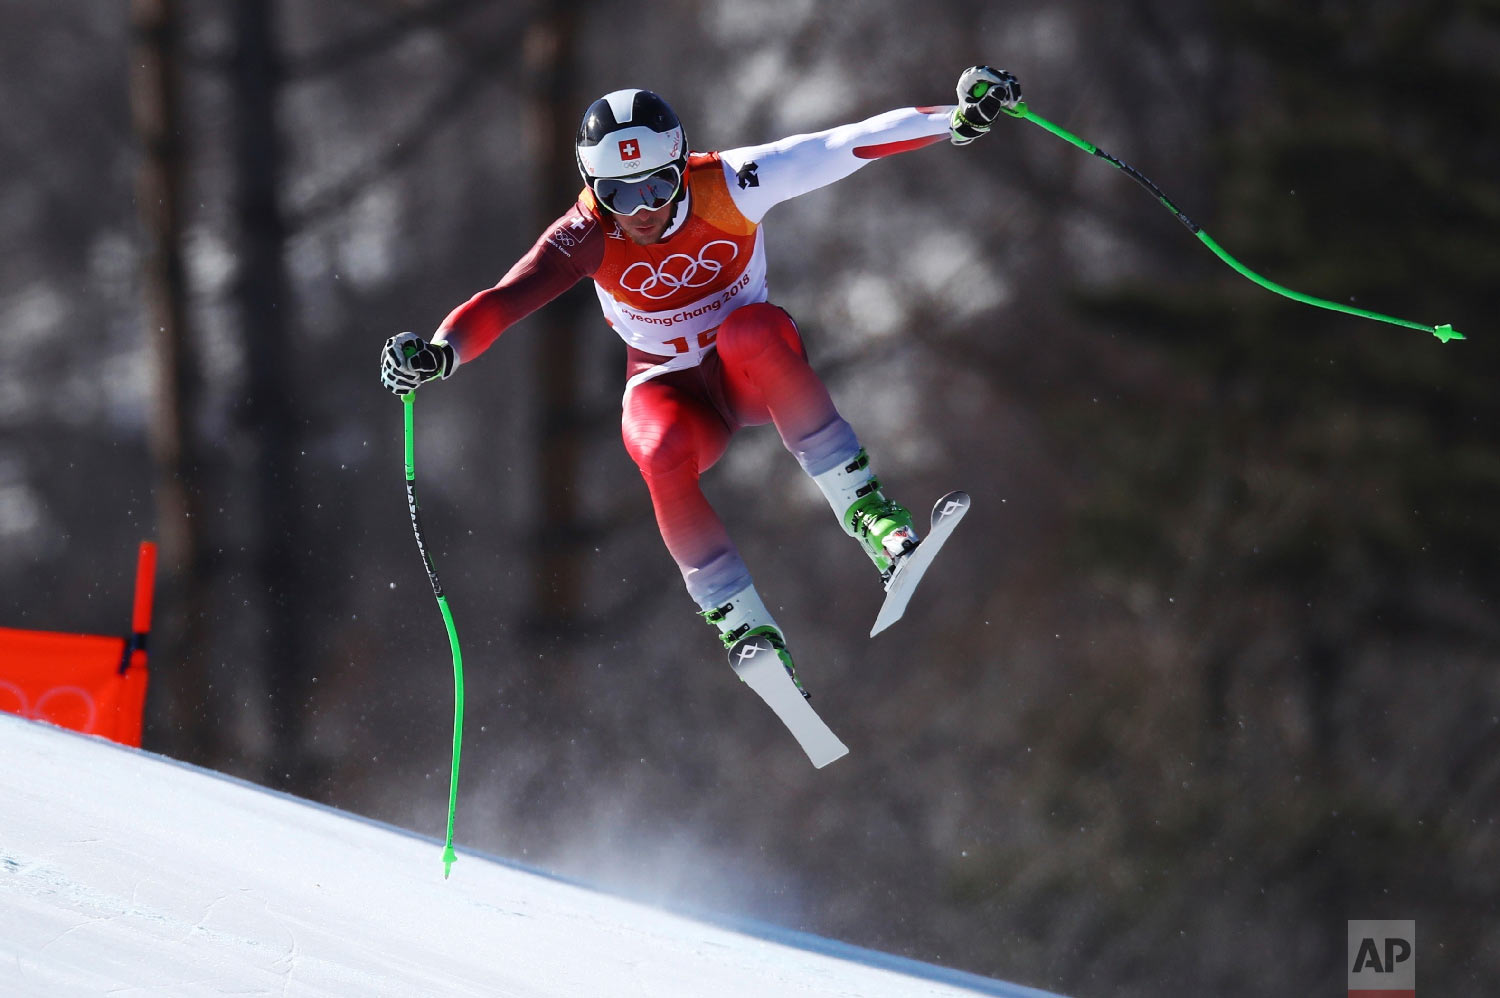  Switzerland's Justin Murisier skis during the downhill portion of the men's combined at the 2018 Winter Olympics in Jeongseon, South Korea, Tuesday, Feb. 13, 2018. (AP Photo/Alessandro Trovati) 